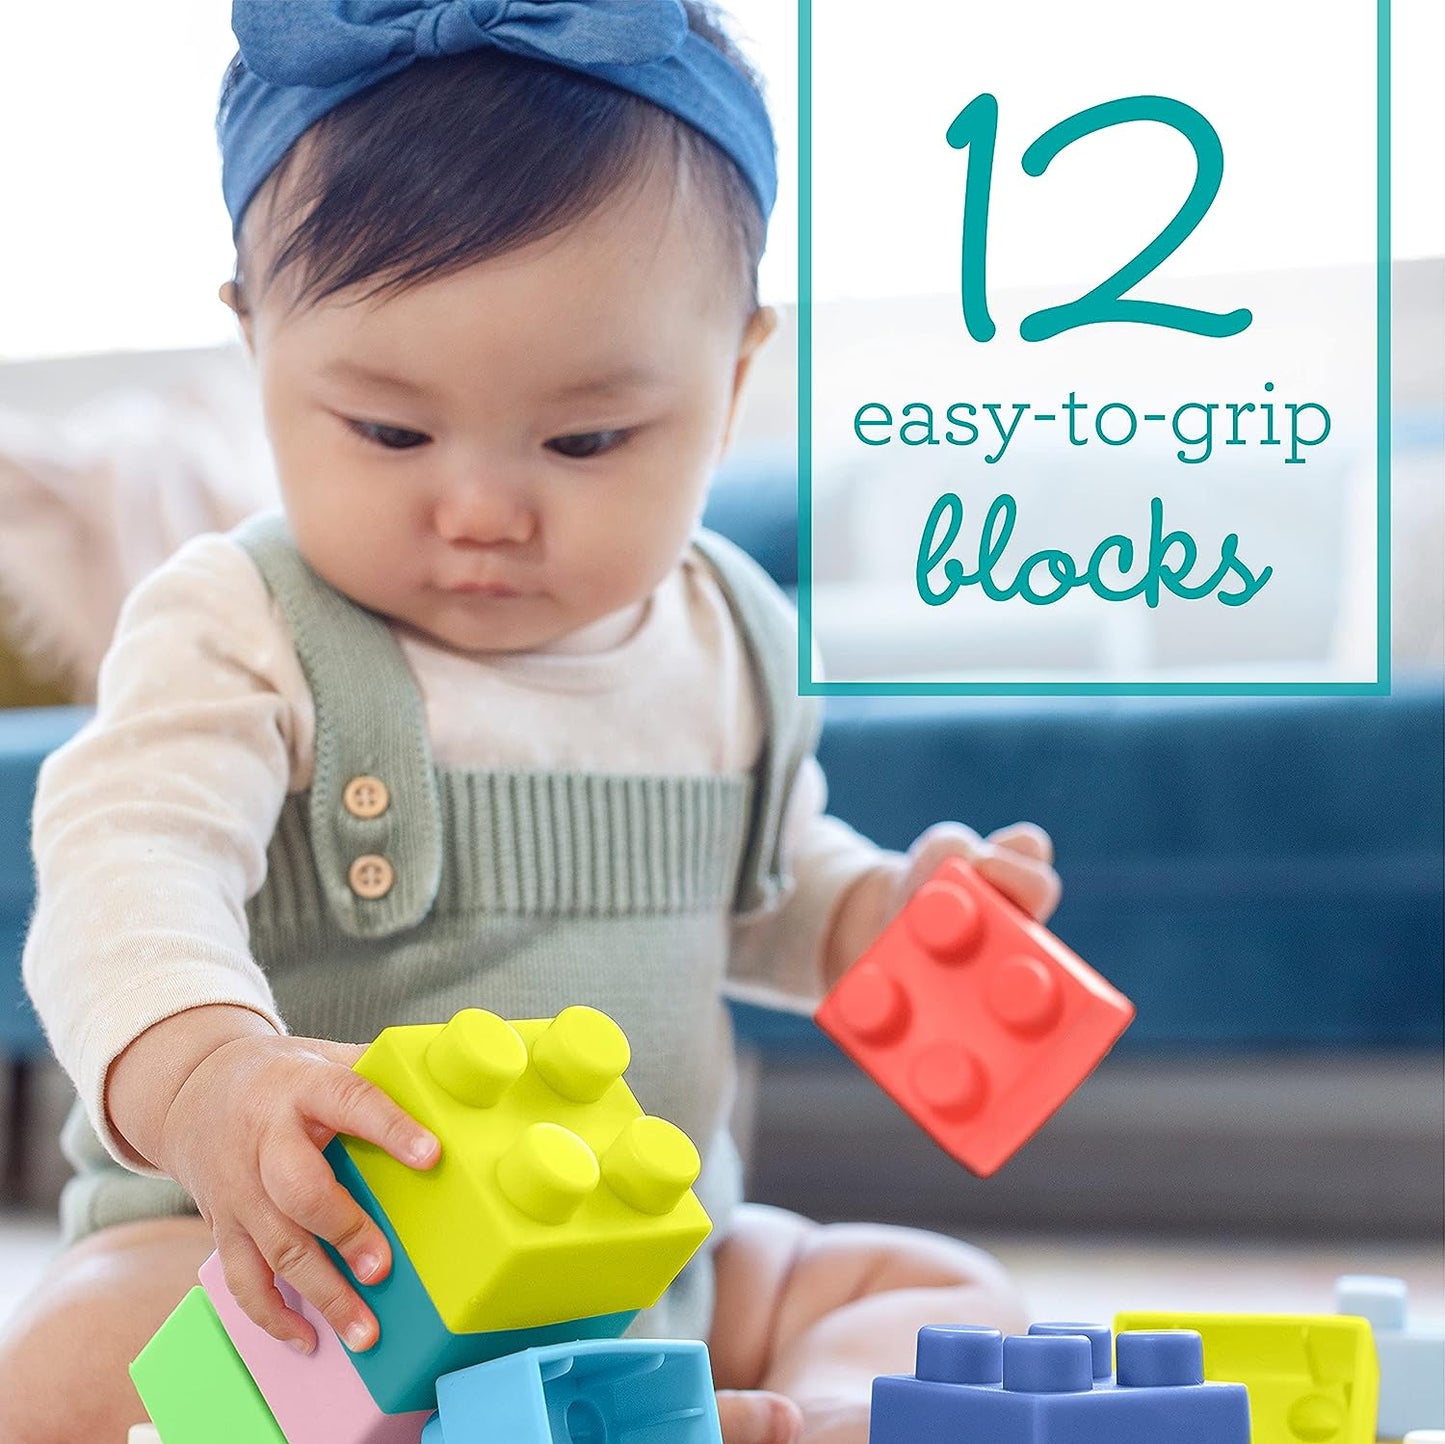 Infantino Super Soft Building Blocks - Easy to Hold for Toddlers